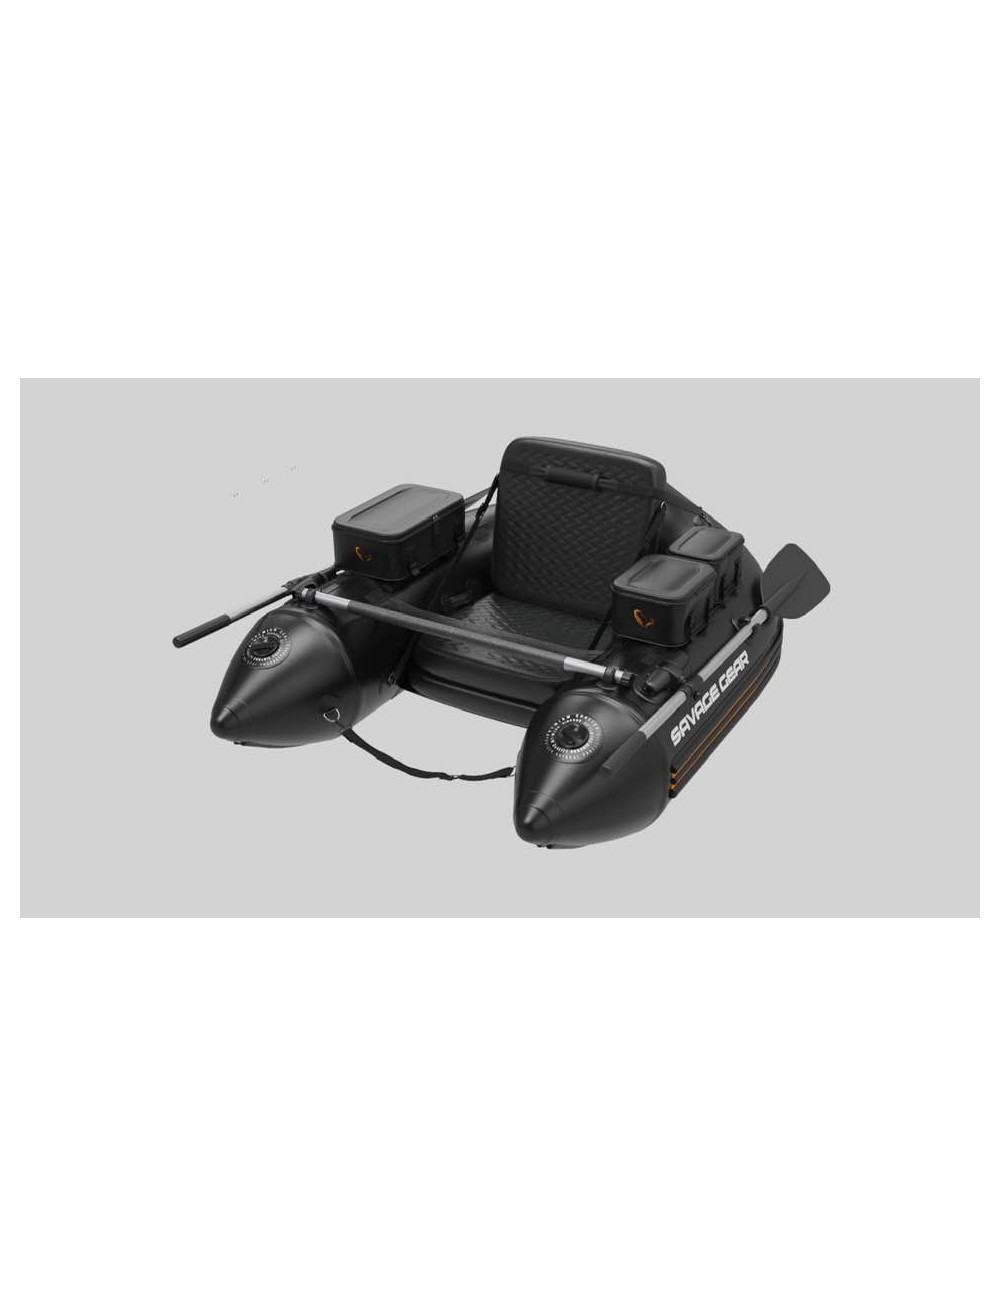 Float Tube Savage Gear High Rider Belly Boat 170